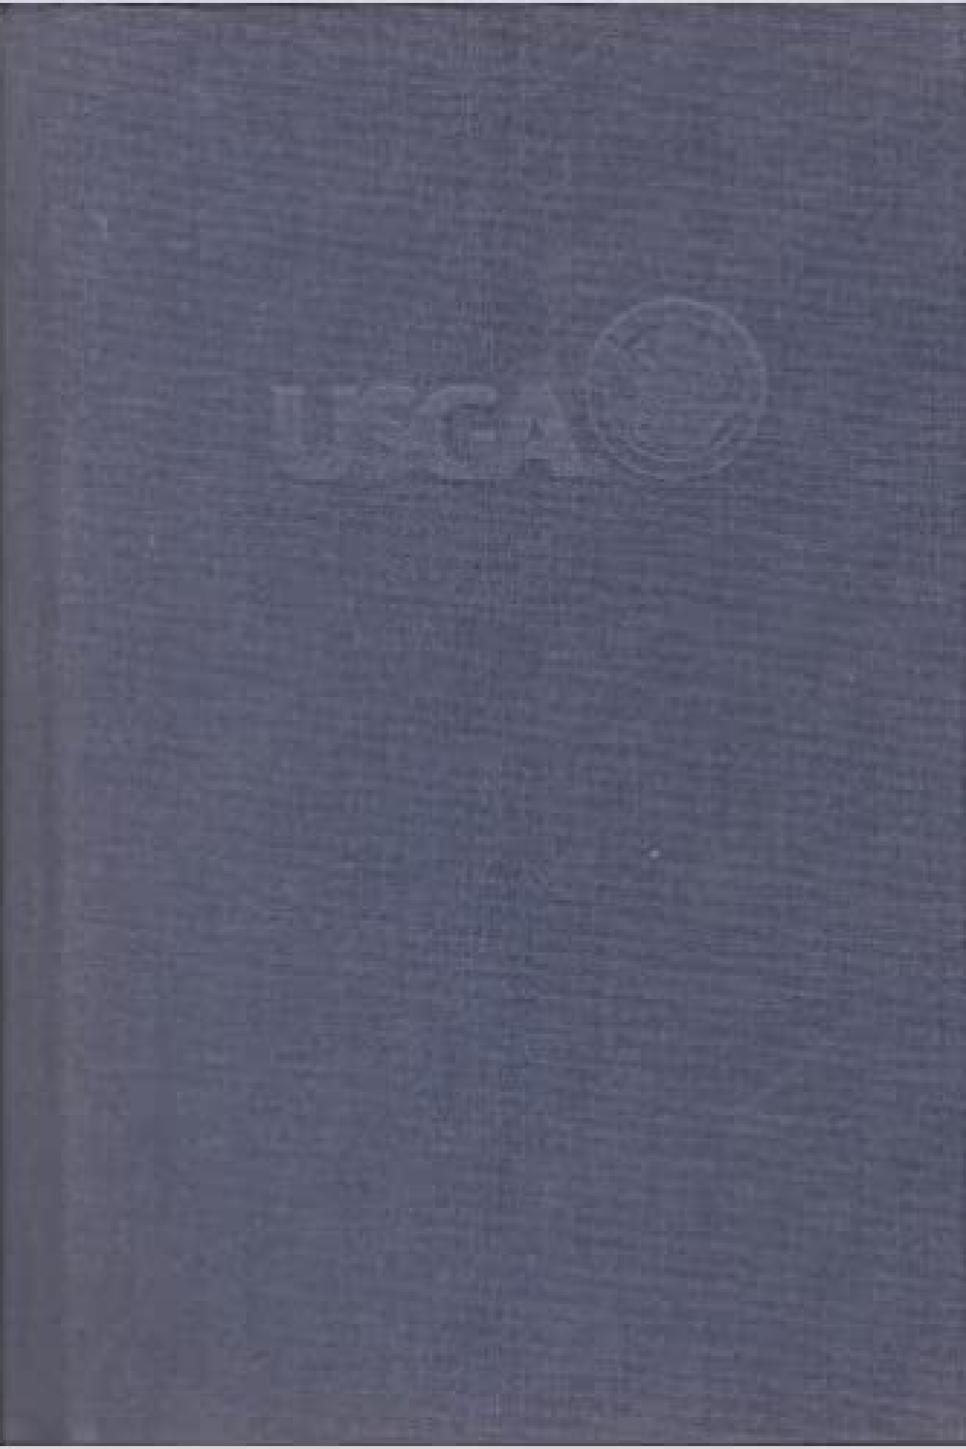 rx-amazonthe-principles-behind-the-rules-of-golf-by-richard-s-tufts-1960.jpeg